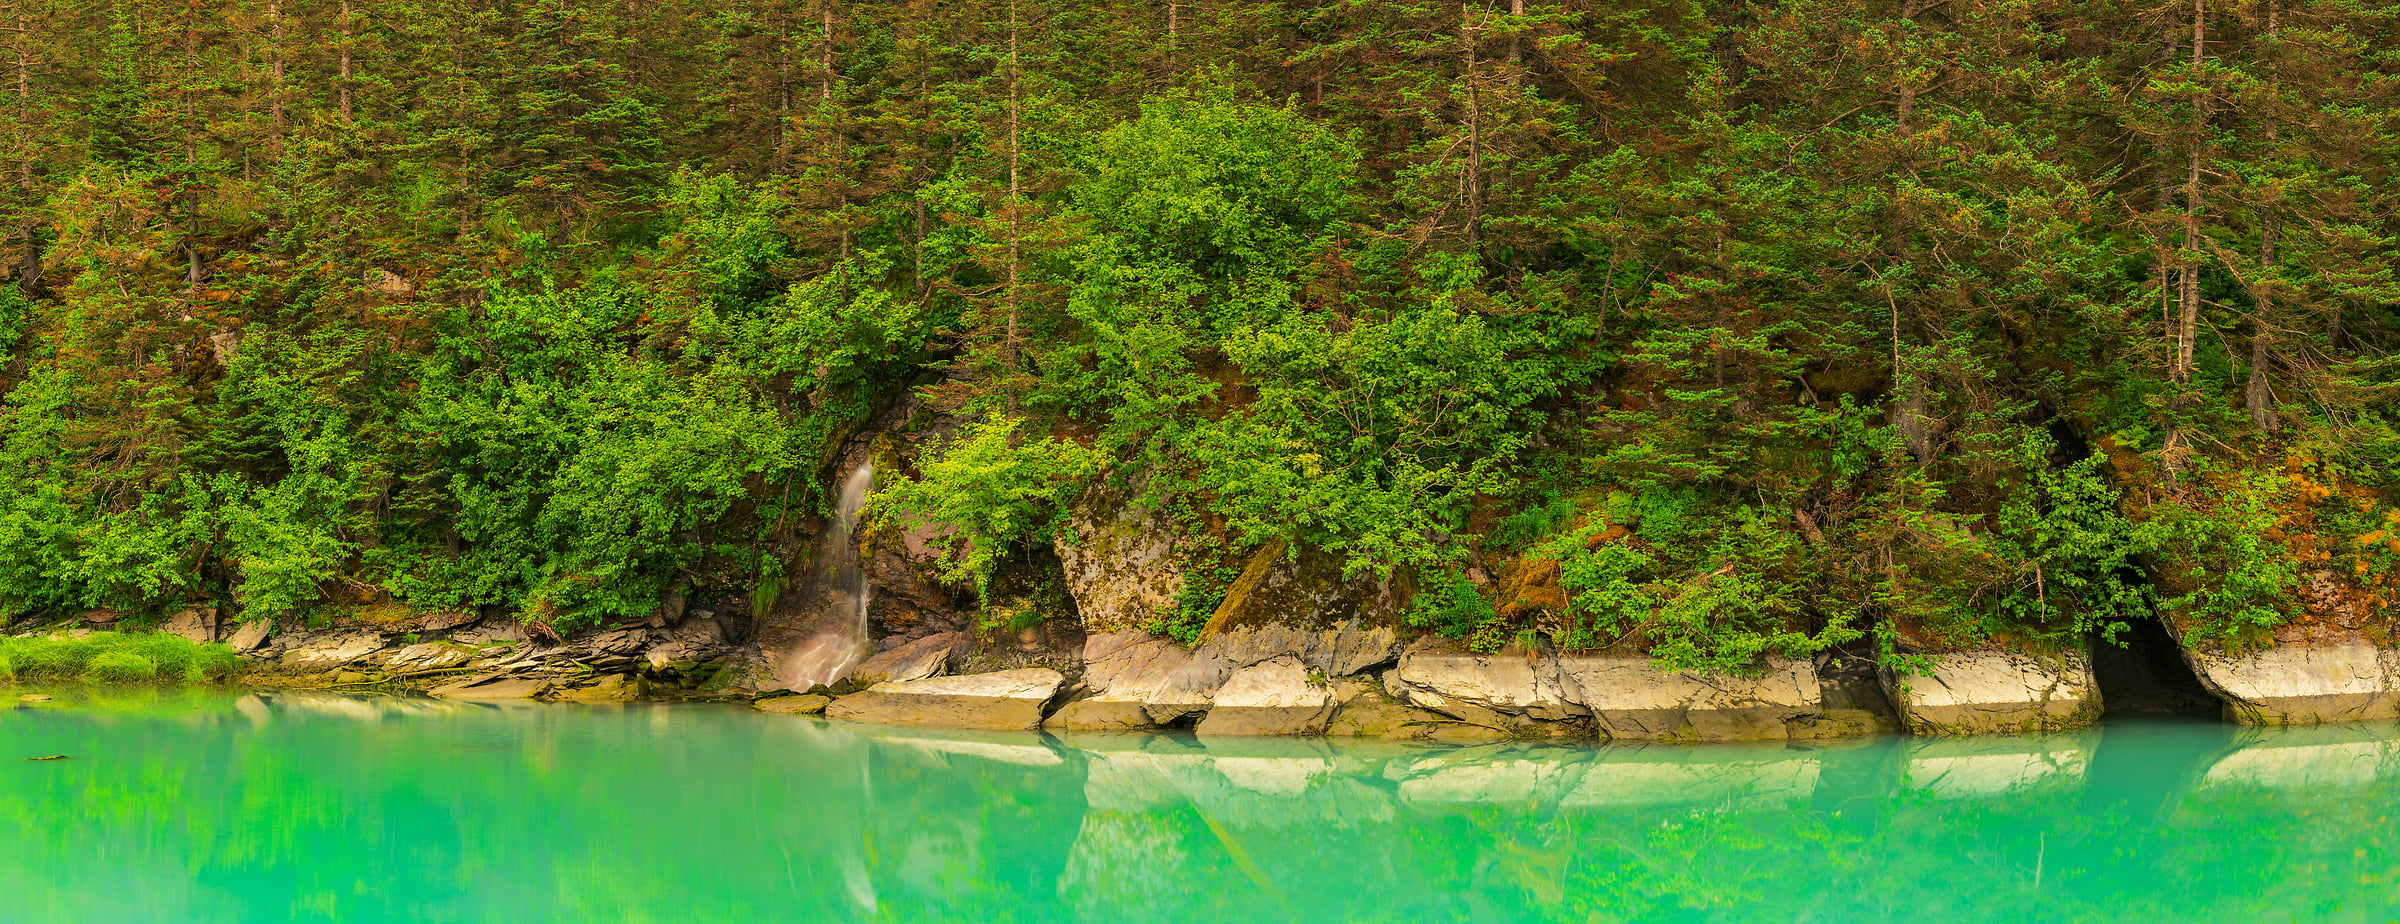 879 megapixels! A very high resolution, large-format wall mural photo print of a pond with green foliage and green water; nature photograph created by John Freeman in Port Valdez, Alaska, USA